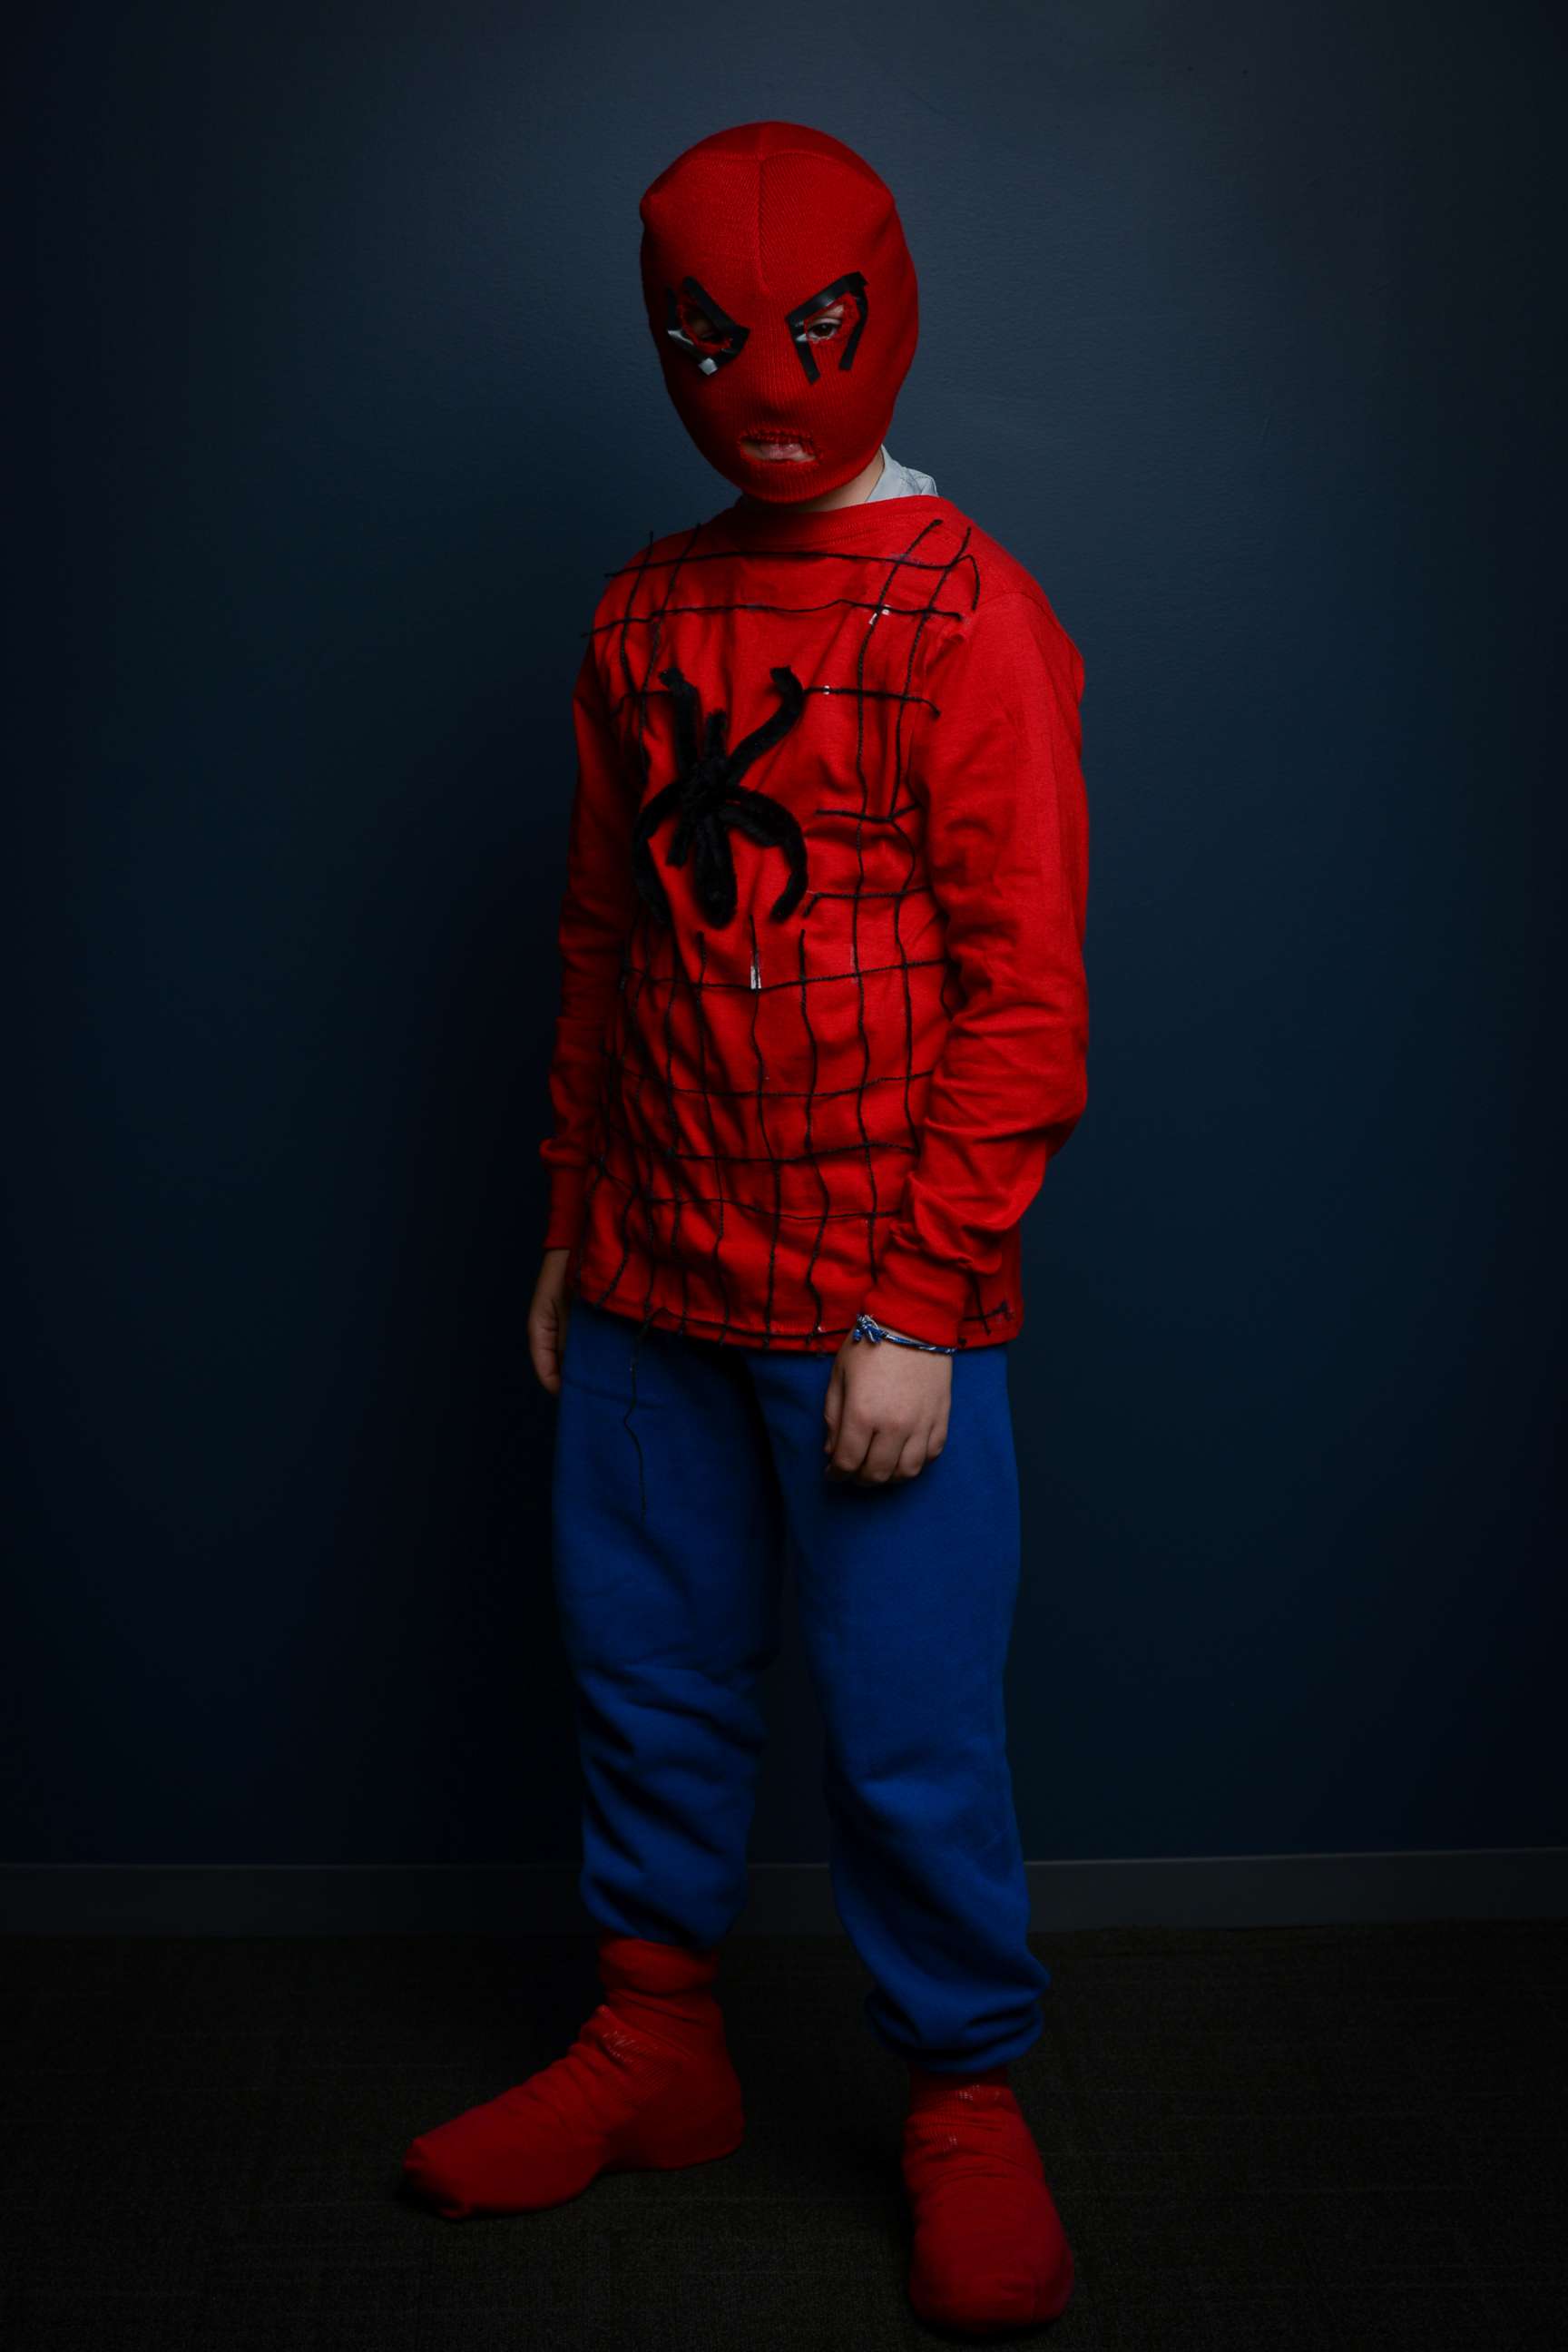 PHOTO: To create this Spider-Man look, use an adult-sized red snow hat and cut out holes for the eyes and the nose.